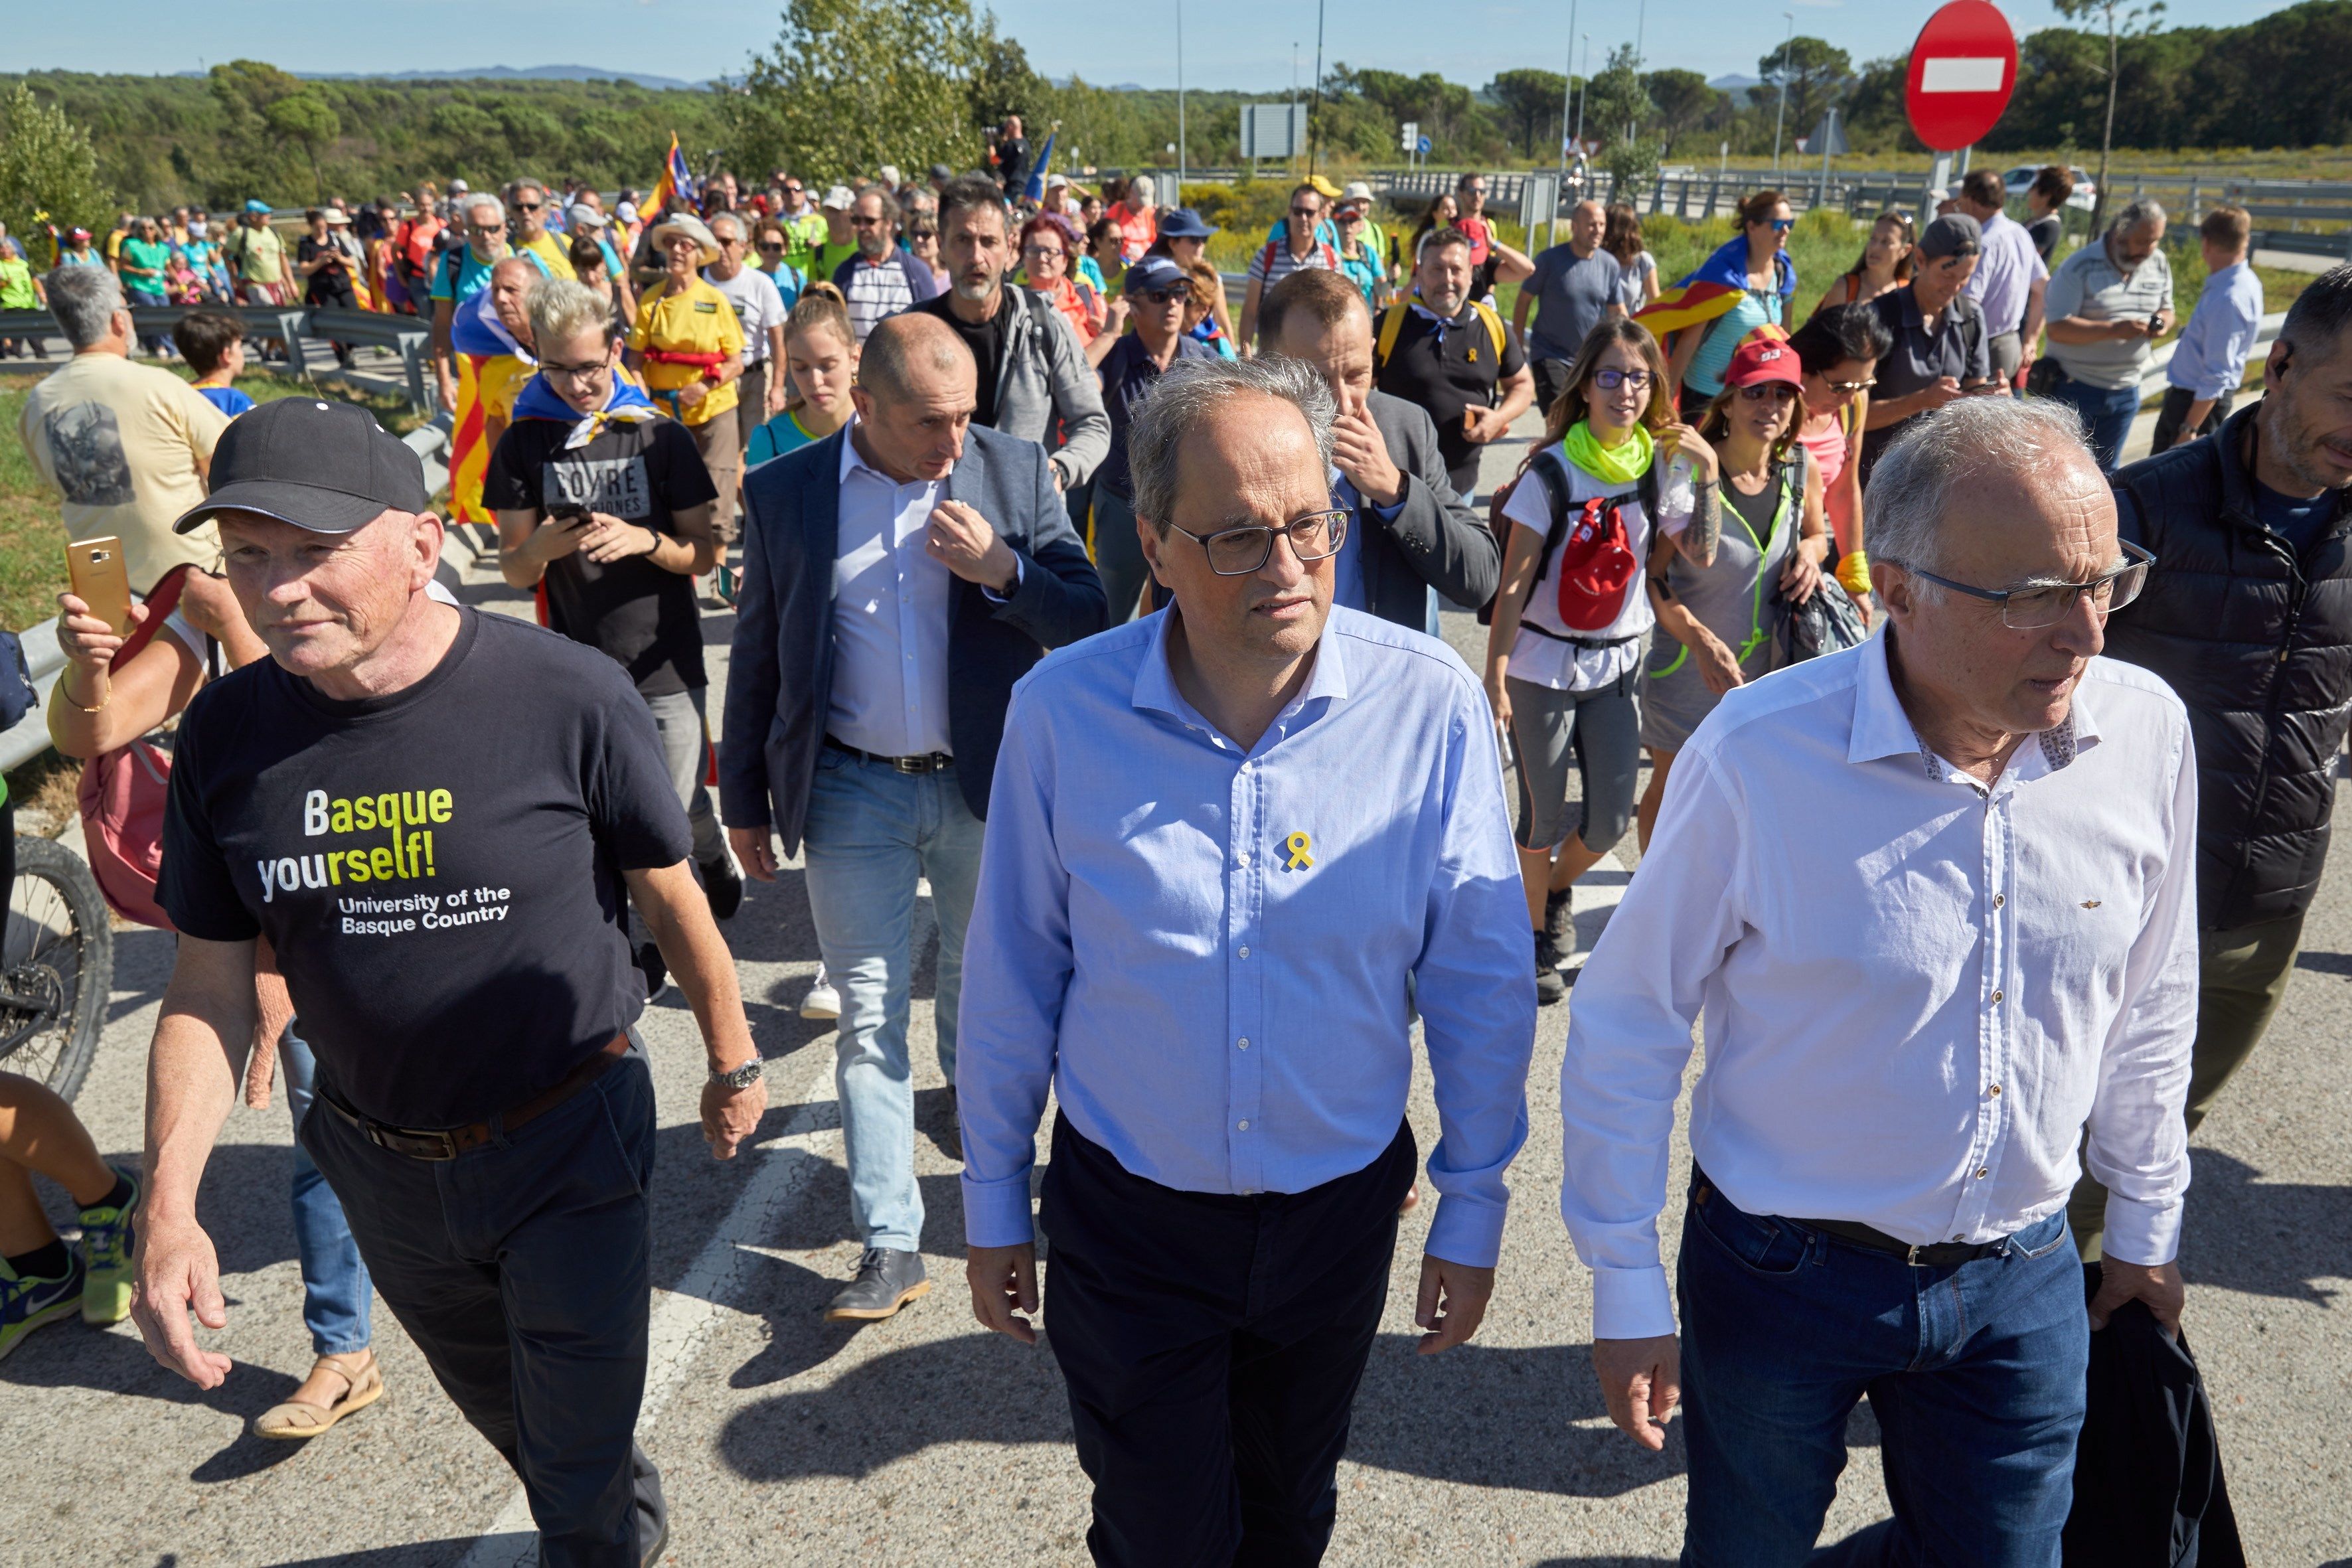 Catalan president Torra: "Violence doesn't represent us and never will"